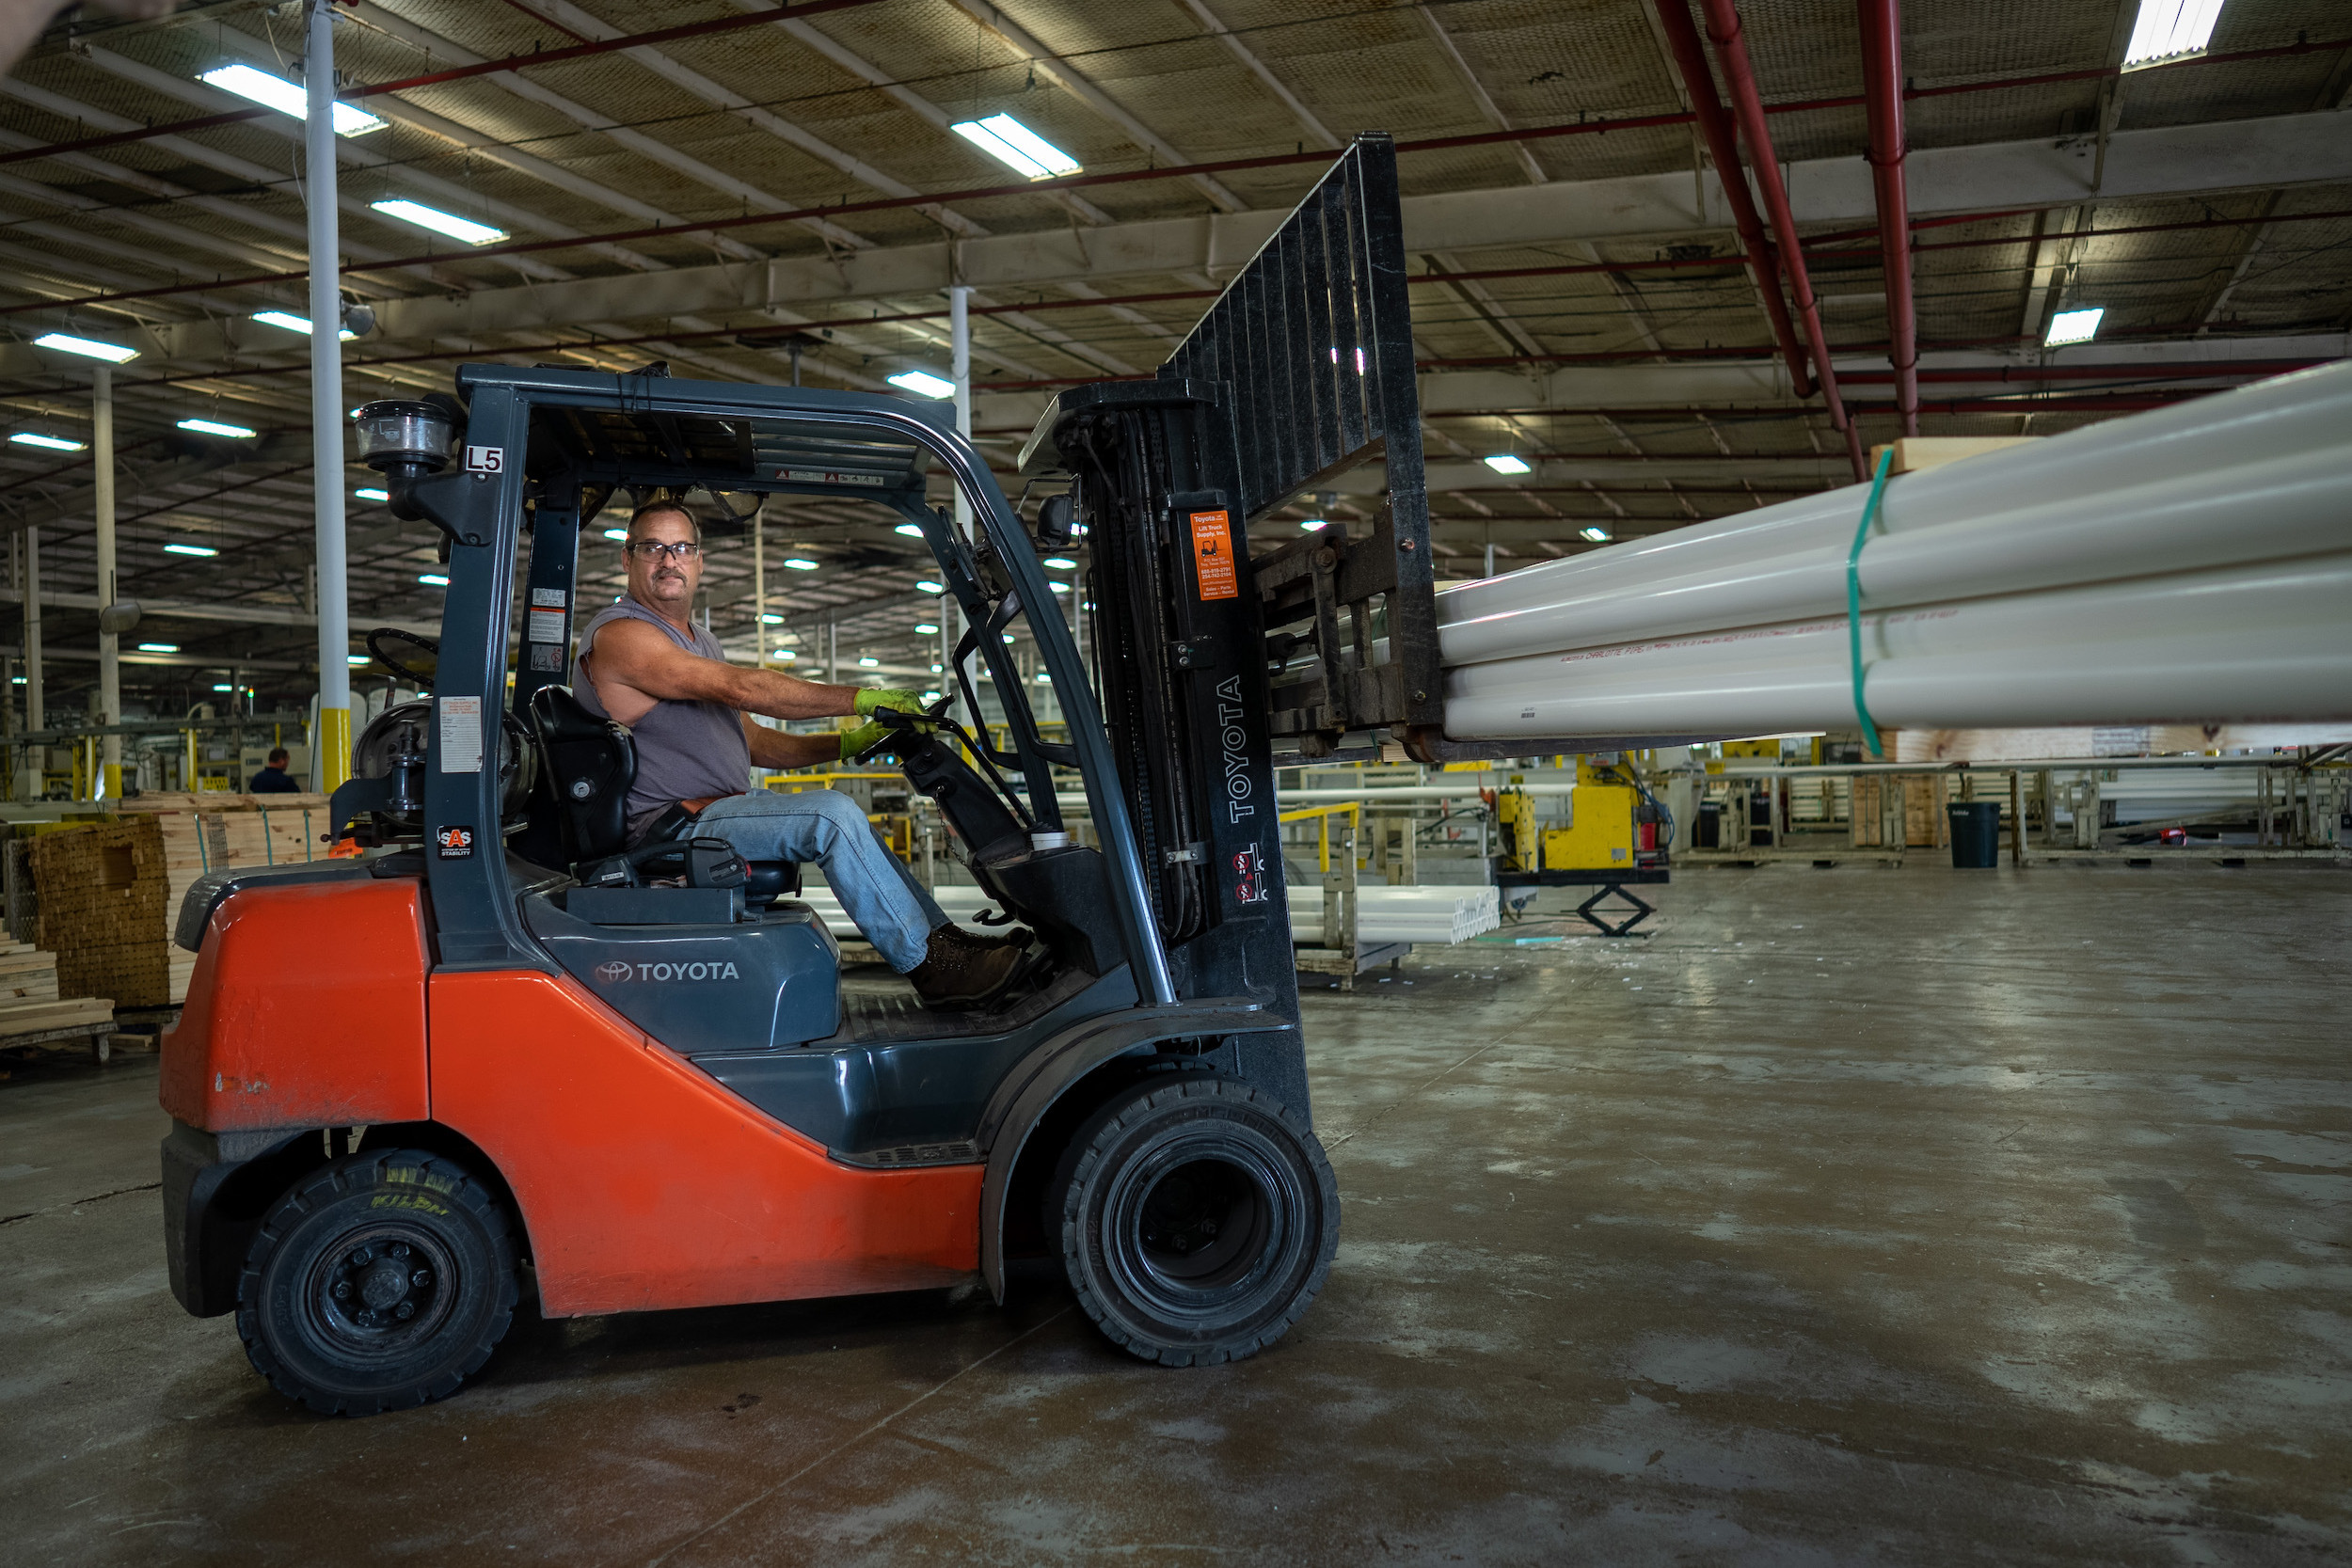 Employee on a forklift carrying some pipe